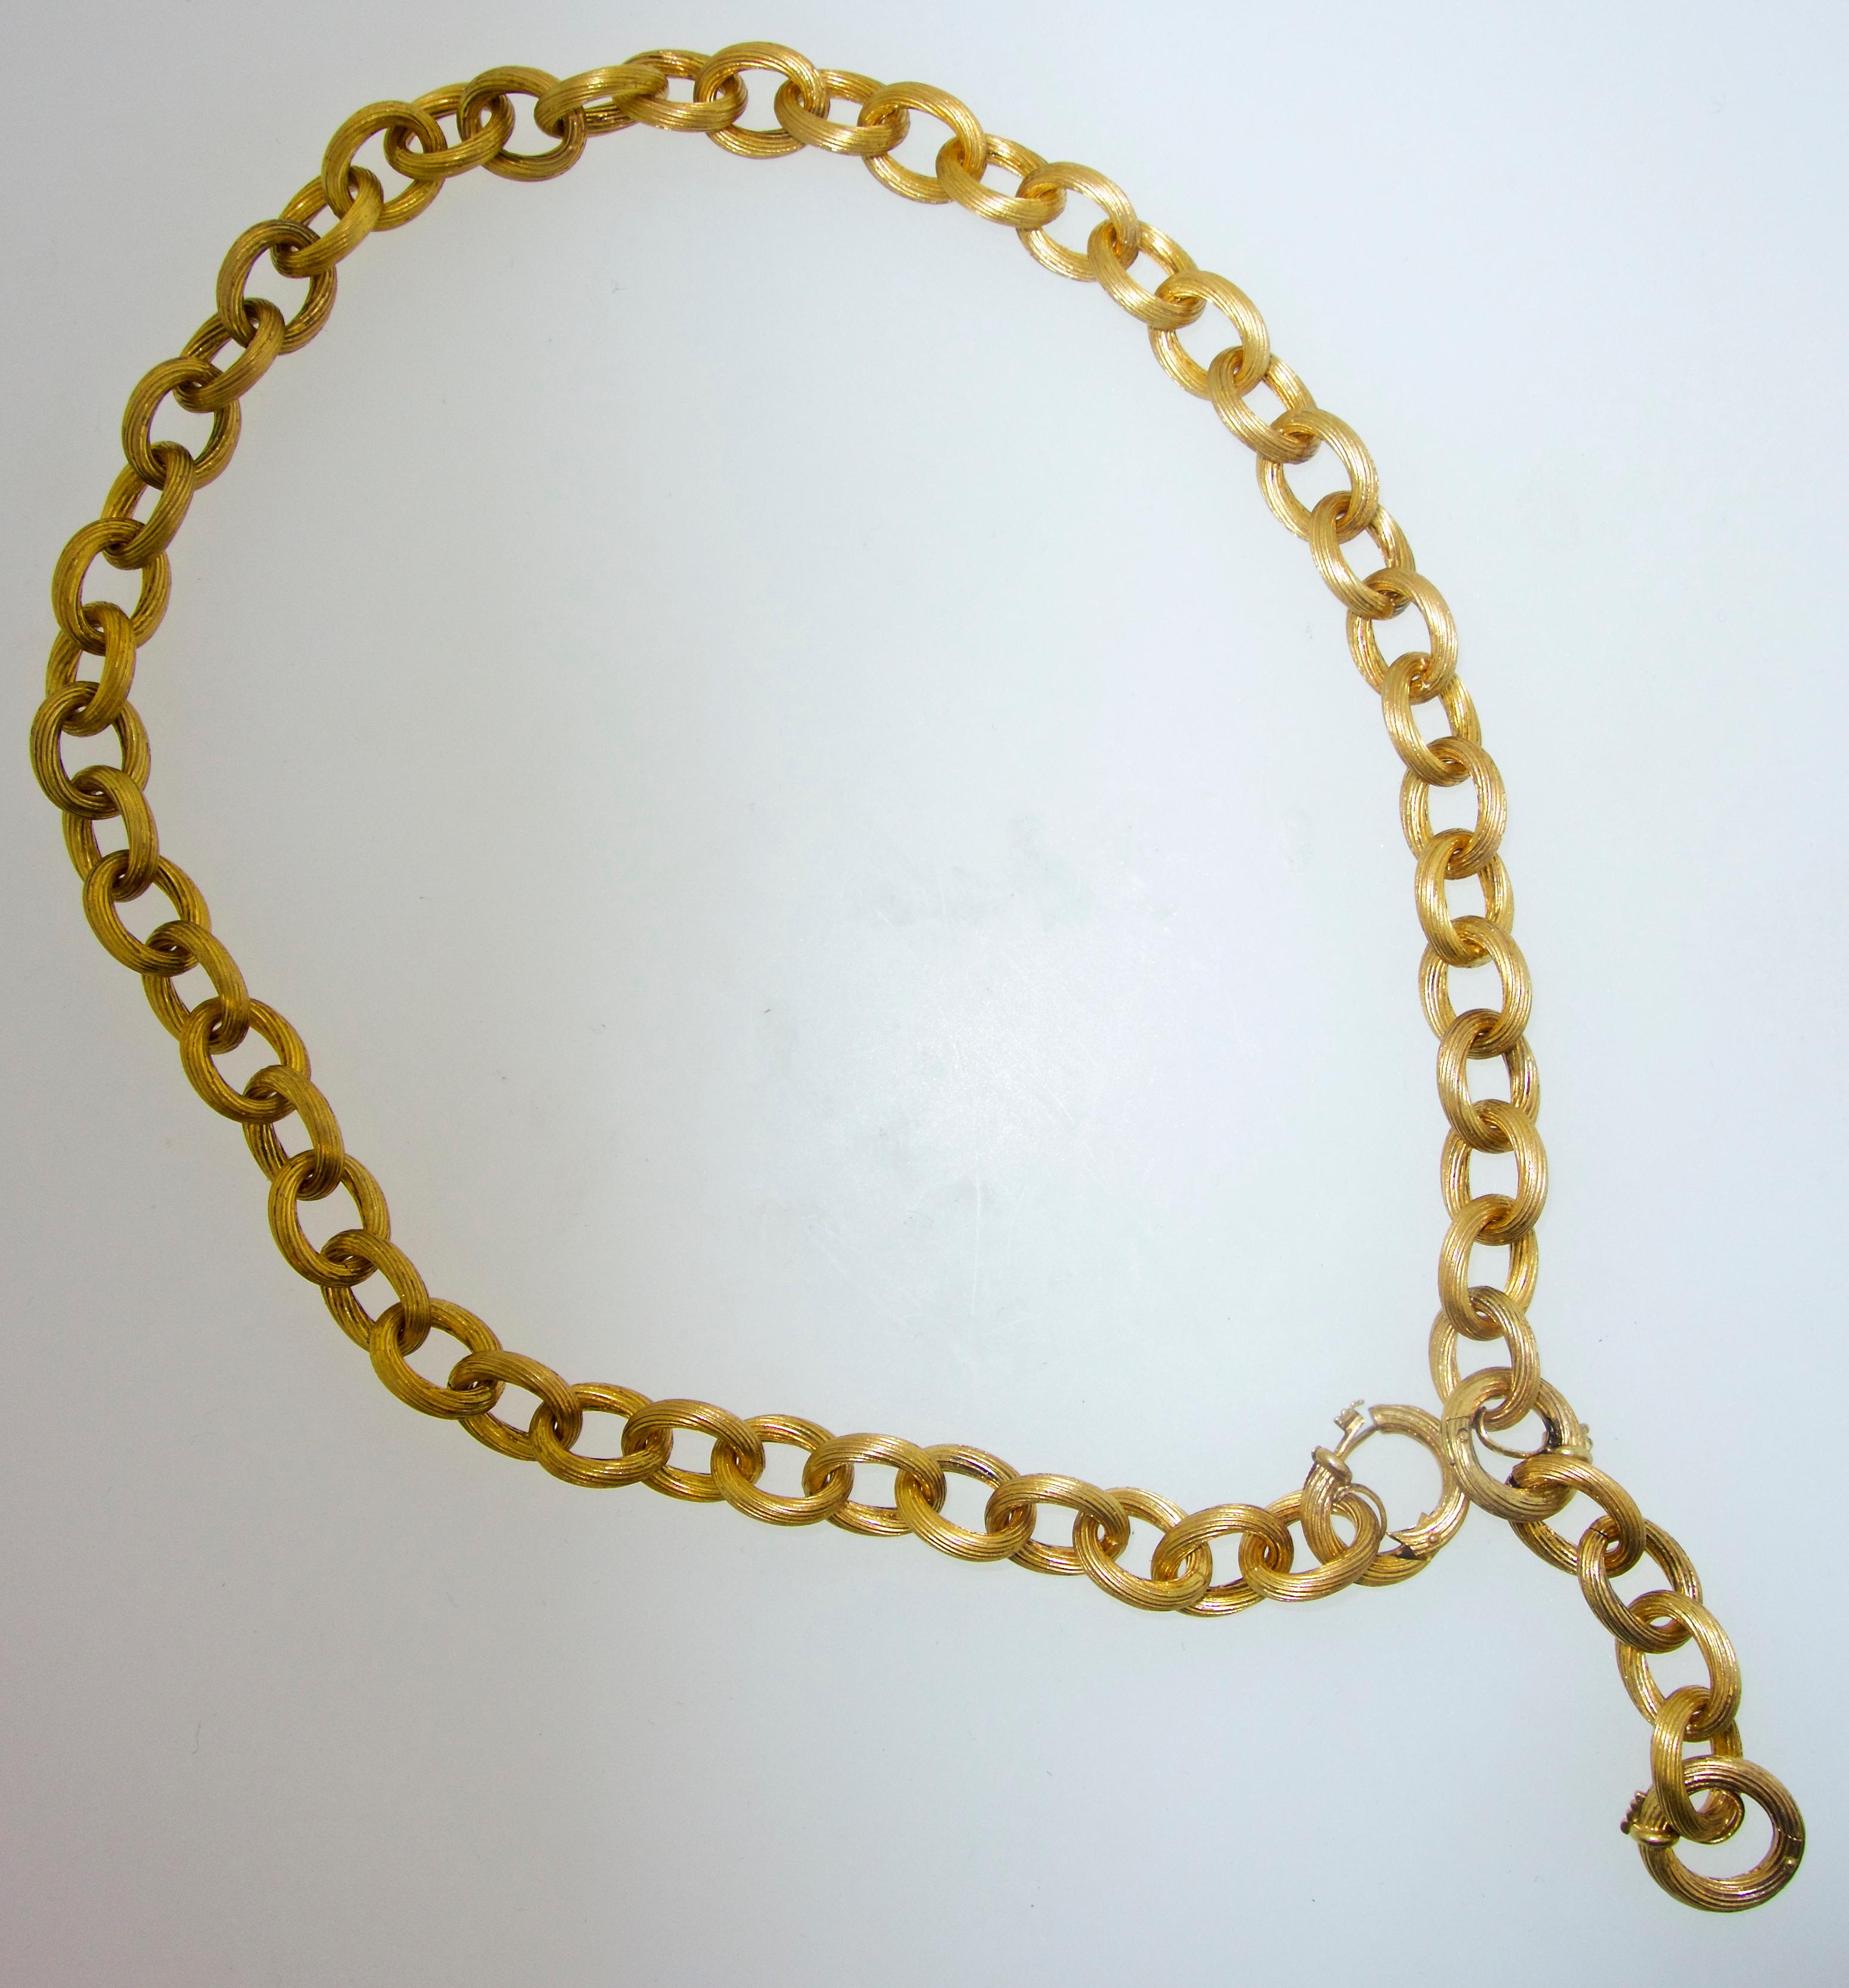 Antique  Victorian gold chain that can be worn several different ways.  The total length is 19 inches.  There is a two inch section that can be removed, or structured so that it can be a pendant chain.  This is a hand made link chain, probably